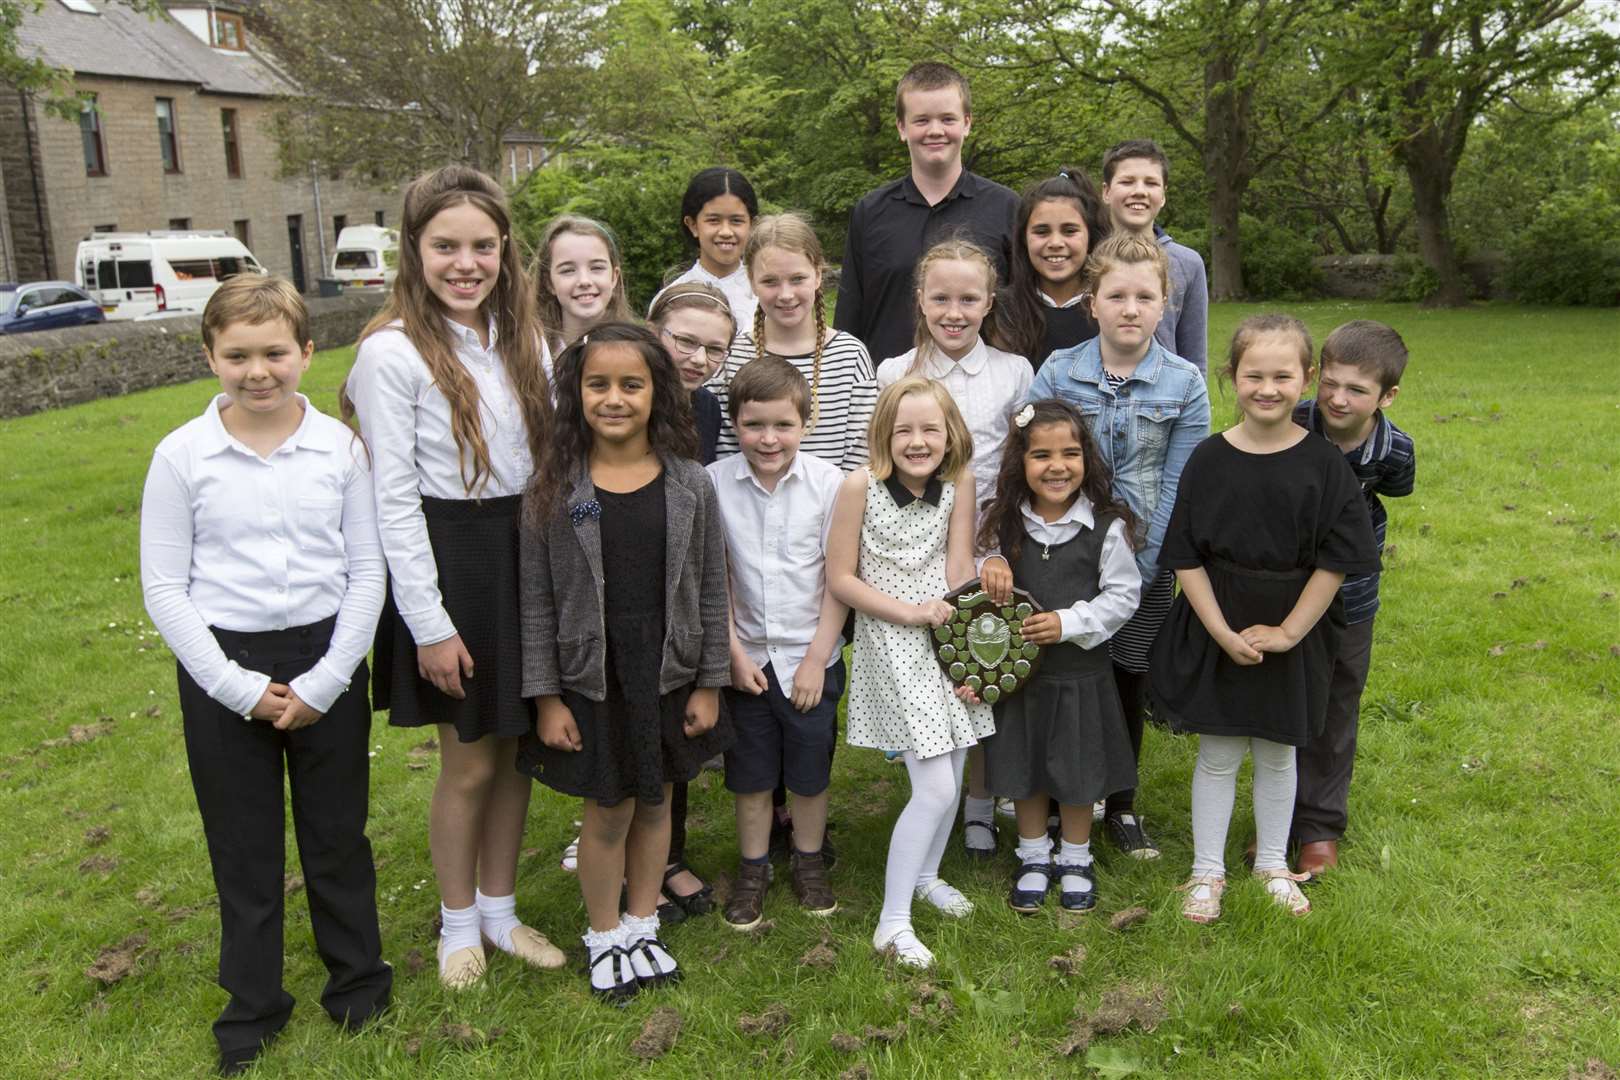 Accents Caithness won the Henrietta Sinclair Shield for rural school choirs at the last Caithness Music Festival, held in June 2019. Picture: Robert MacDonald / Northern Studios